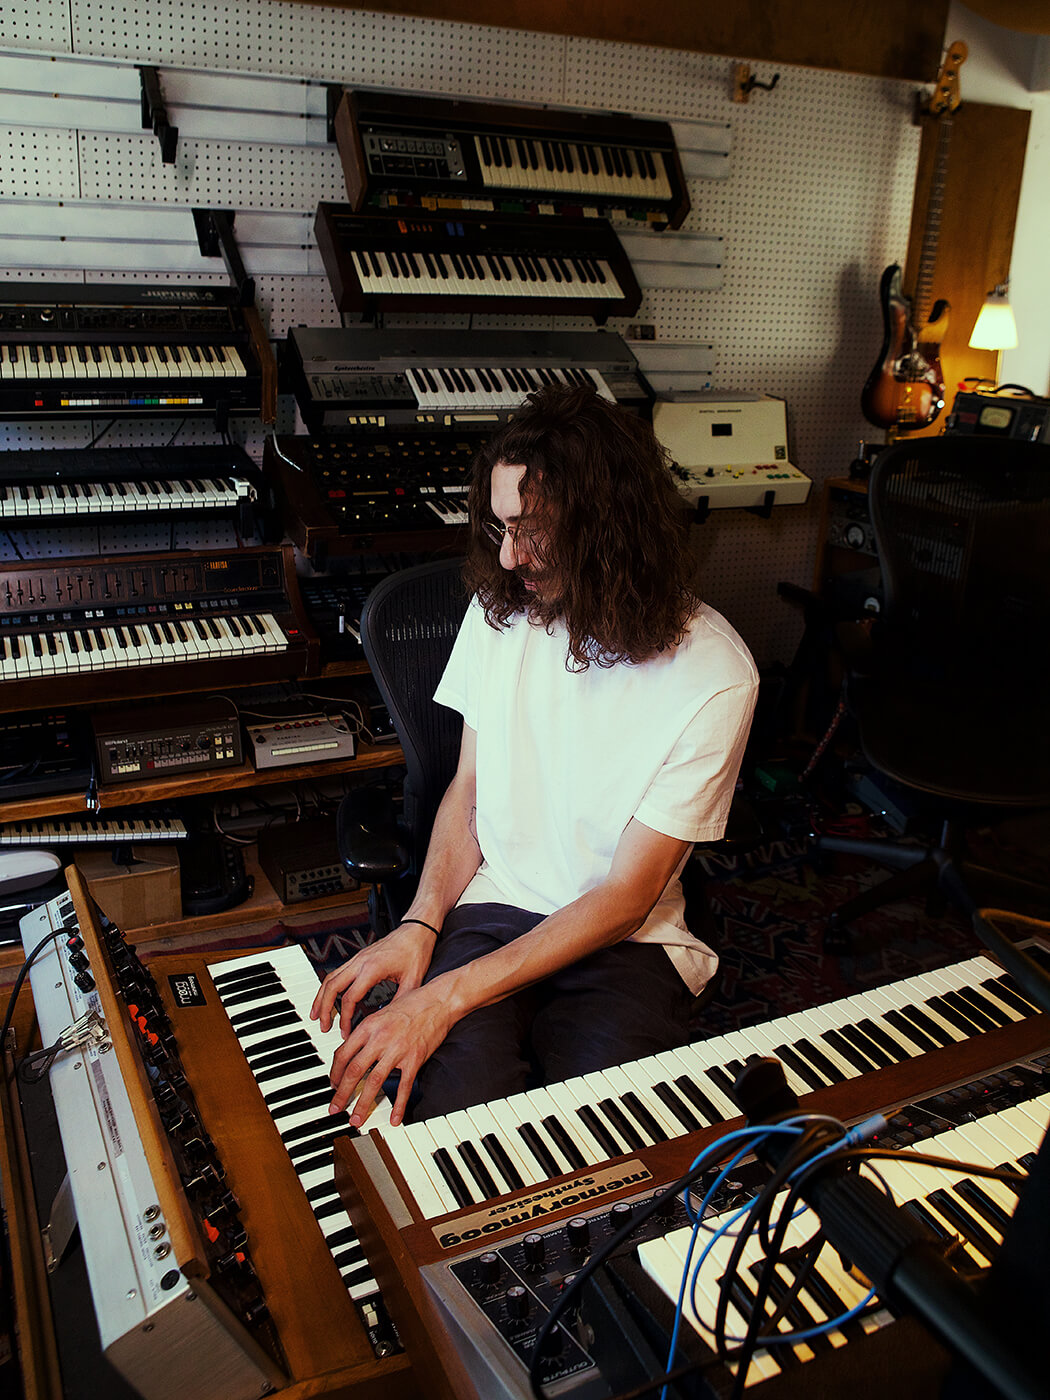 Carter Lang and his synths by Nate Guenther